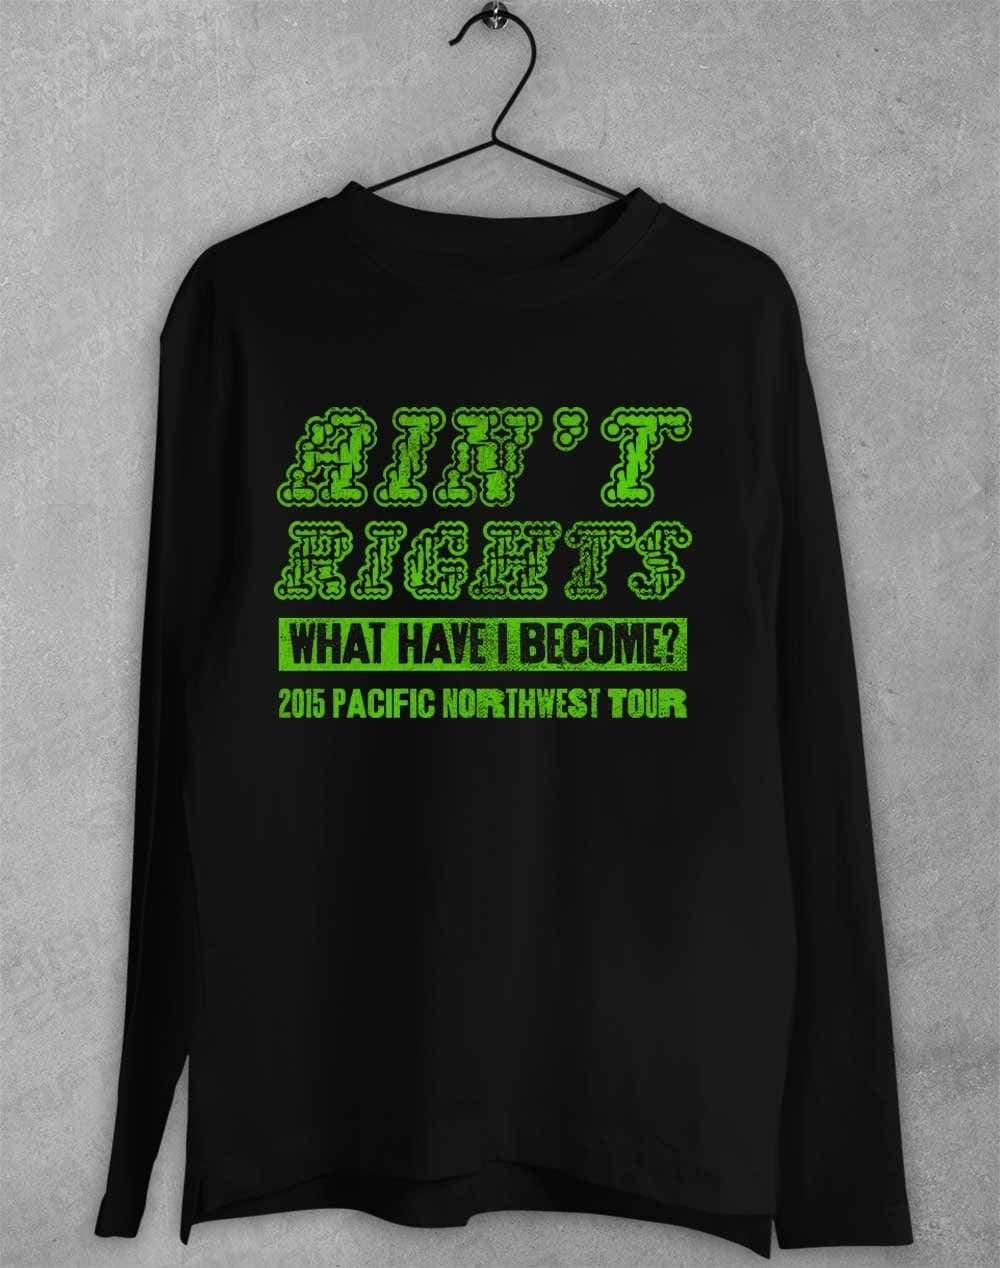 Ain't Rights 2015 Tour Long Sleeve T-Shirt S / Black  - Off World Tees